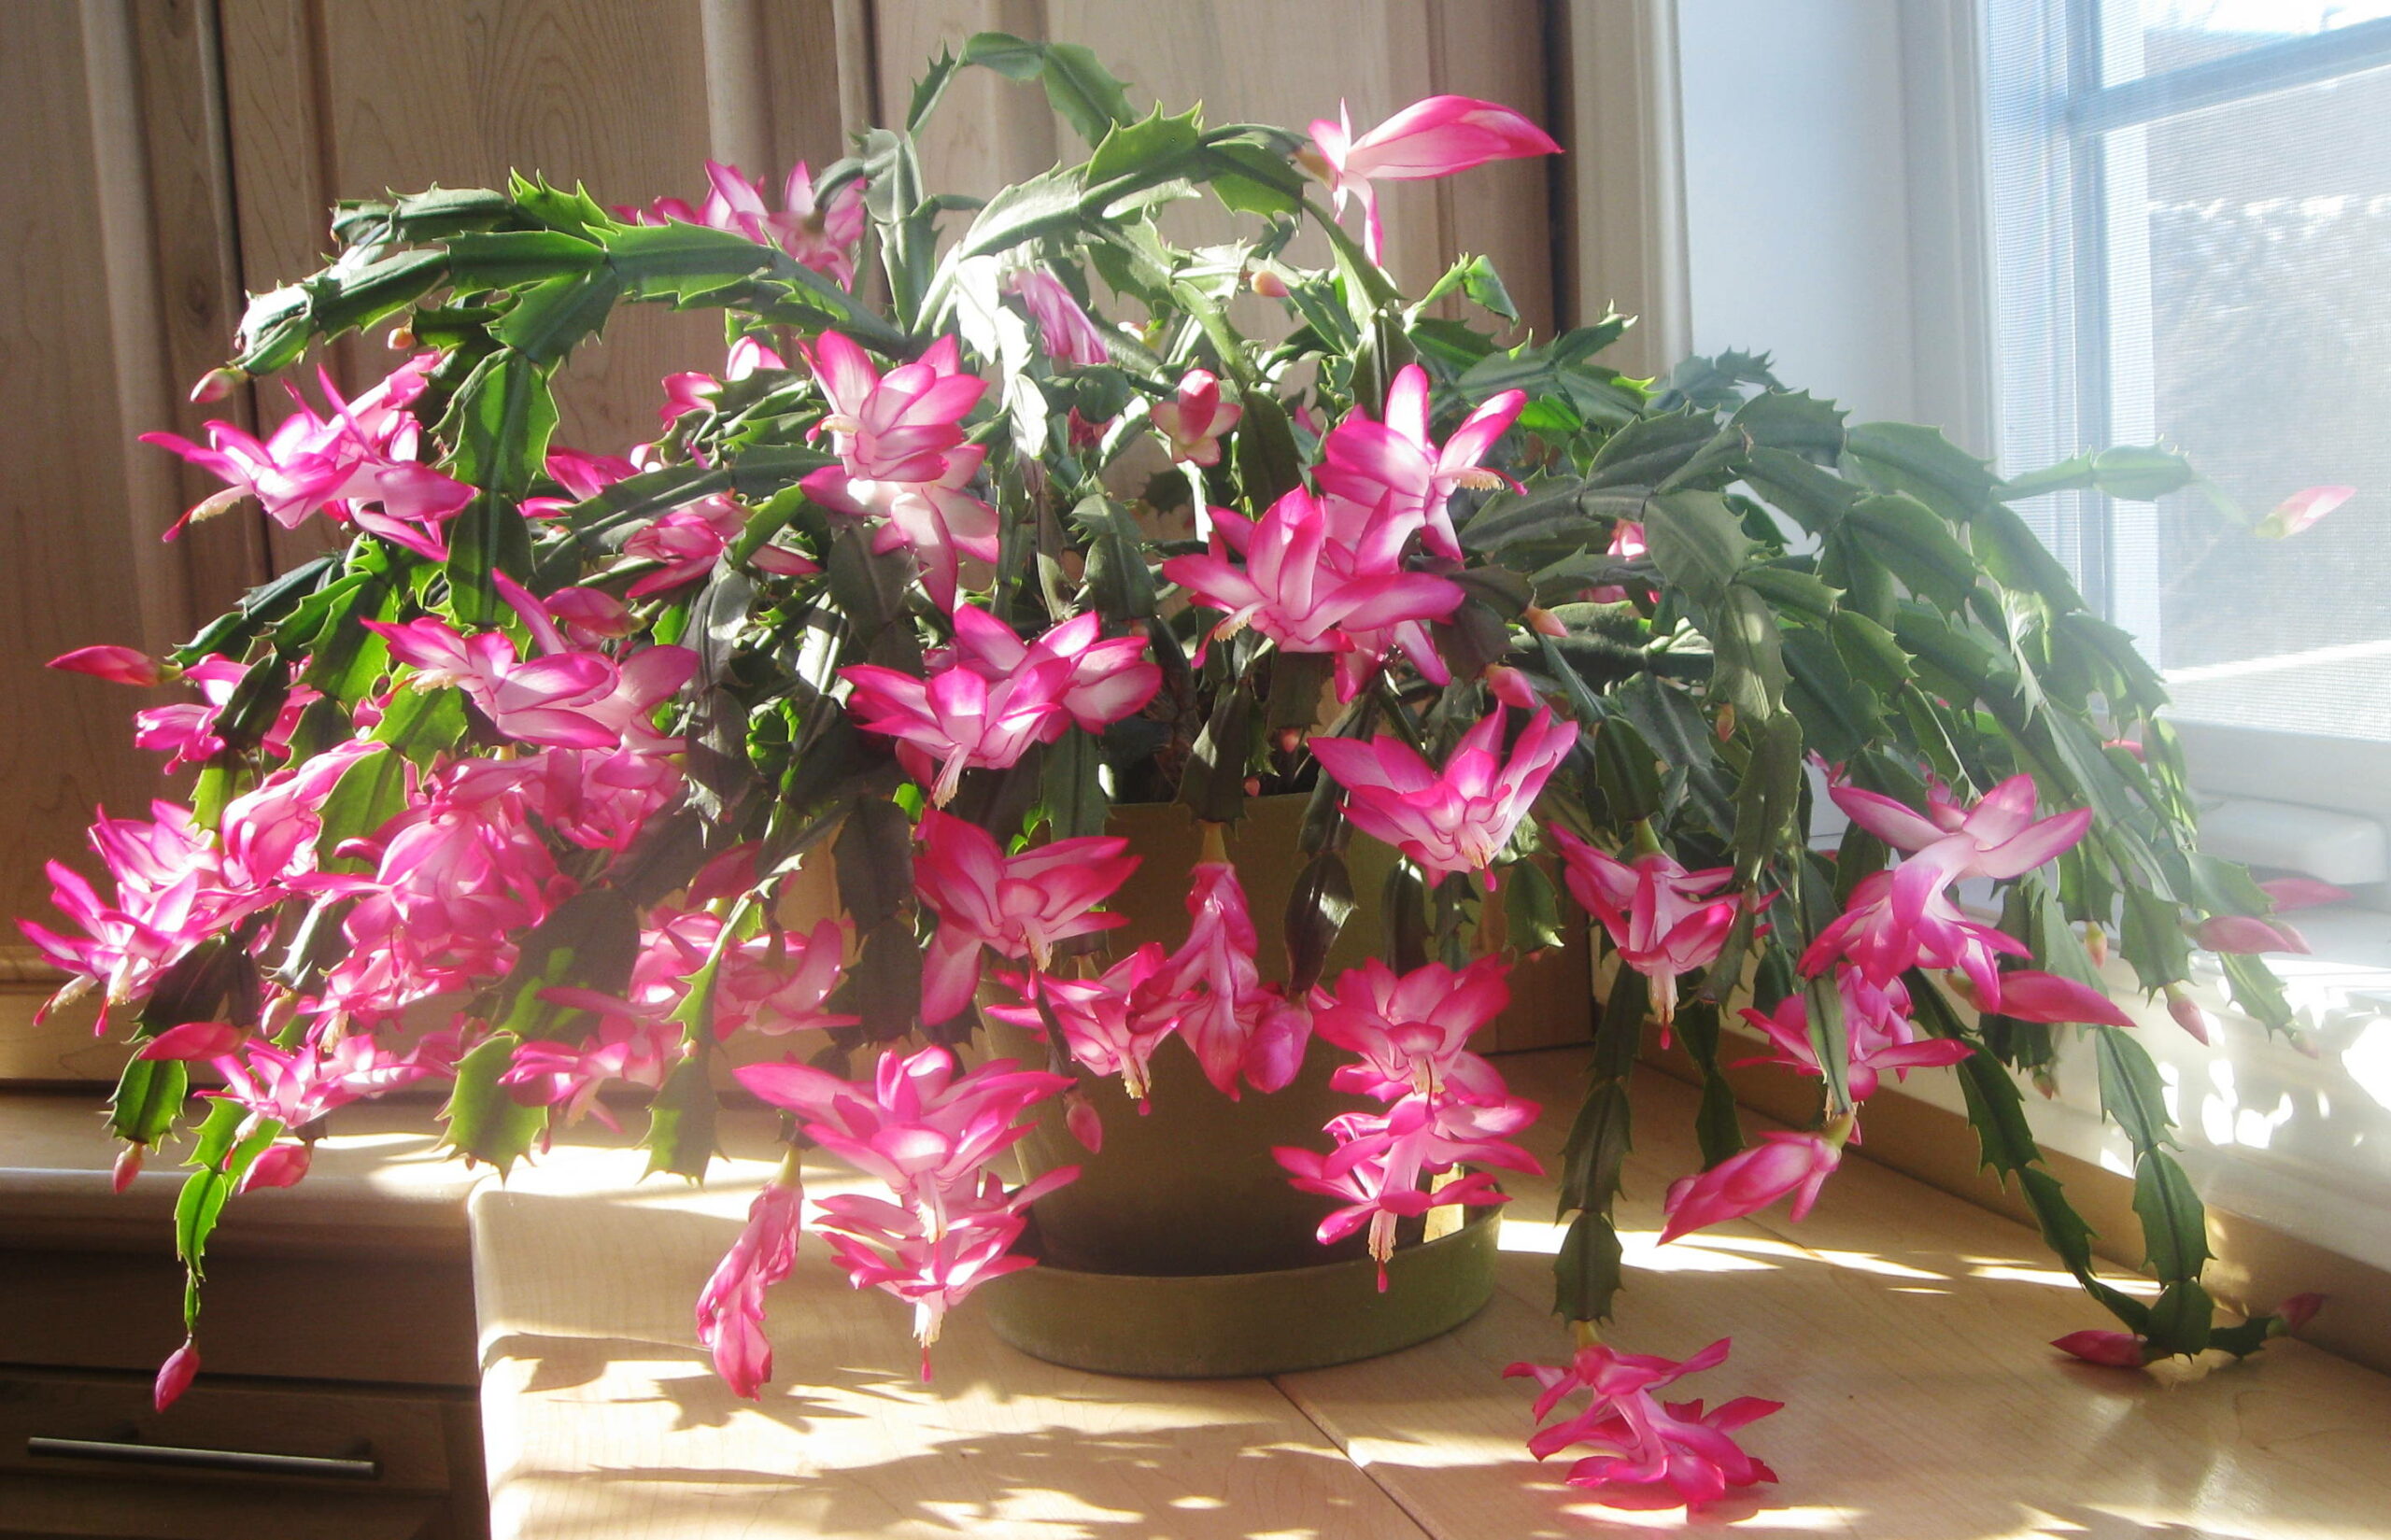 Will the Christmas cactus bloom every year or only once in its lifetime?